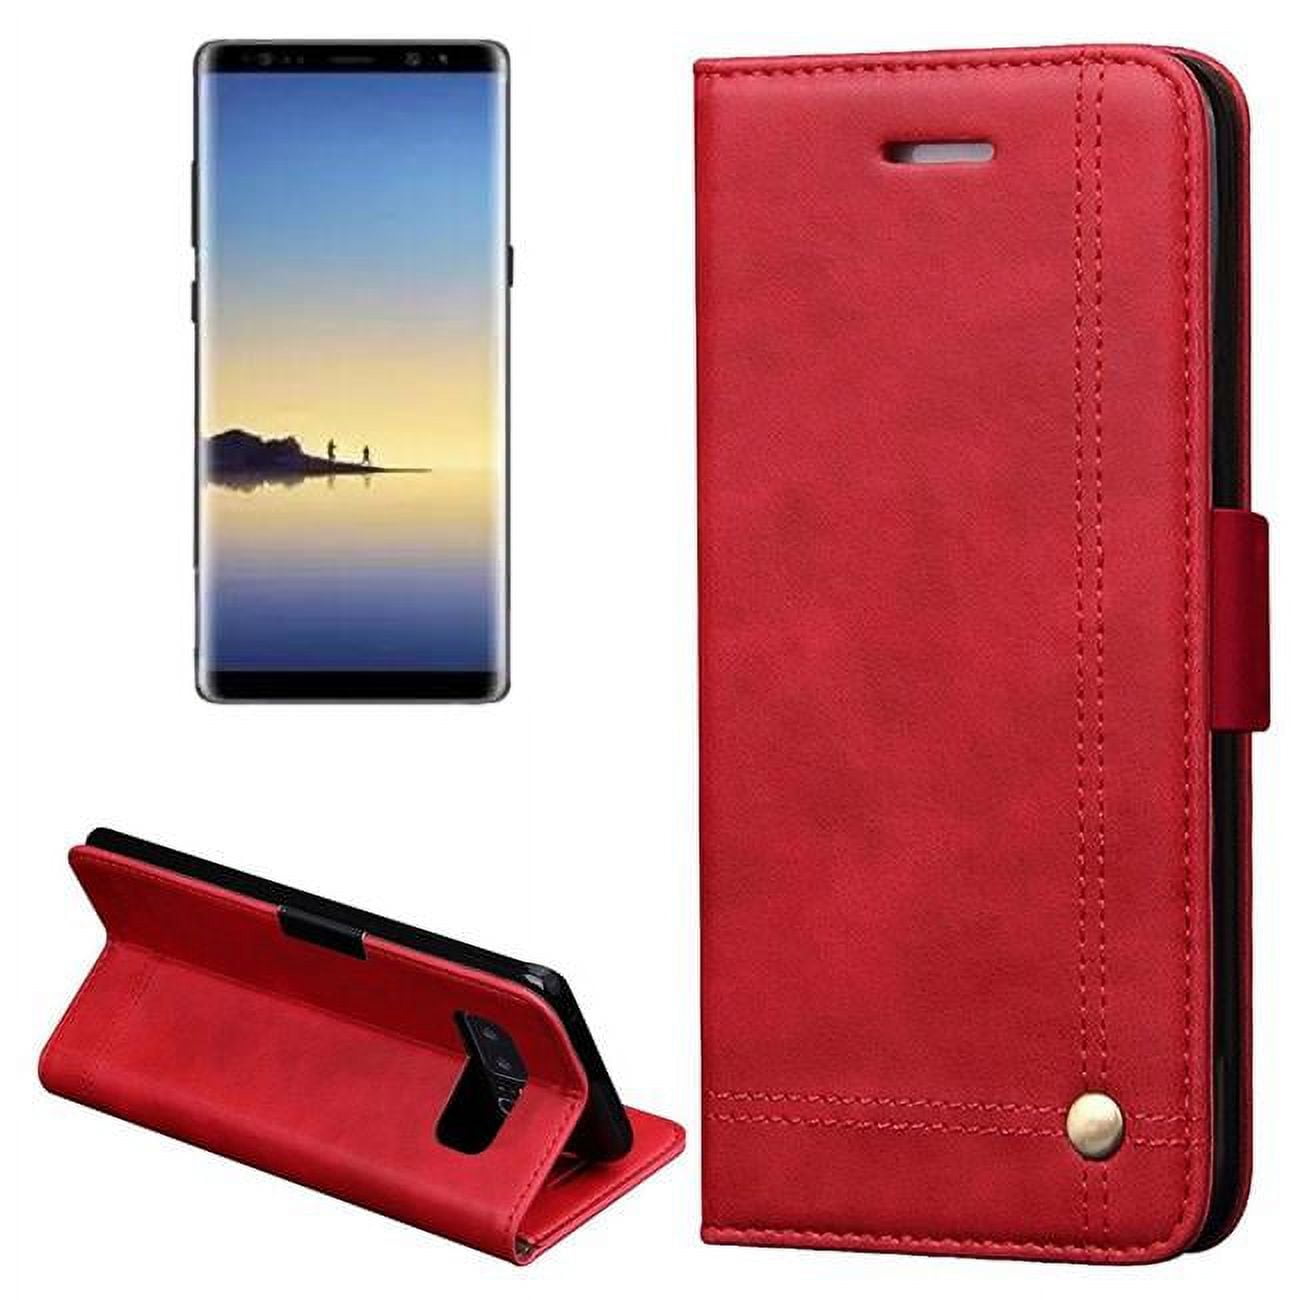 Output I14-37 Faux Leather Book-style Stand Case Cover for Samsung Galaxy Note 8 - Red